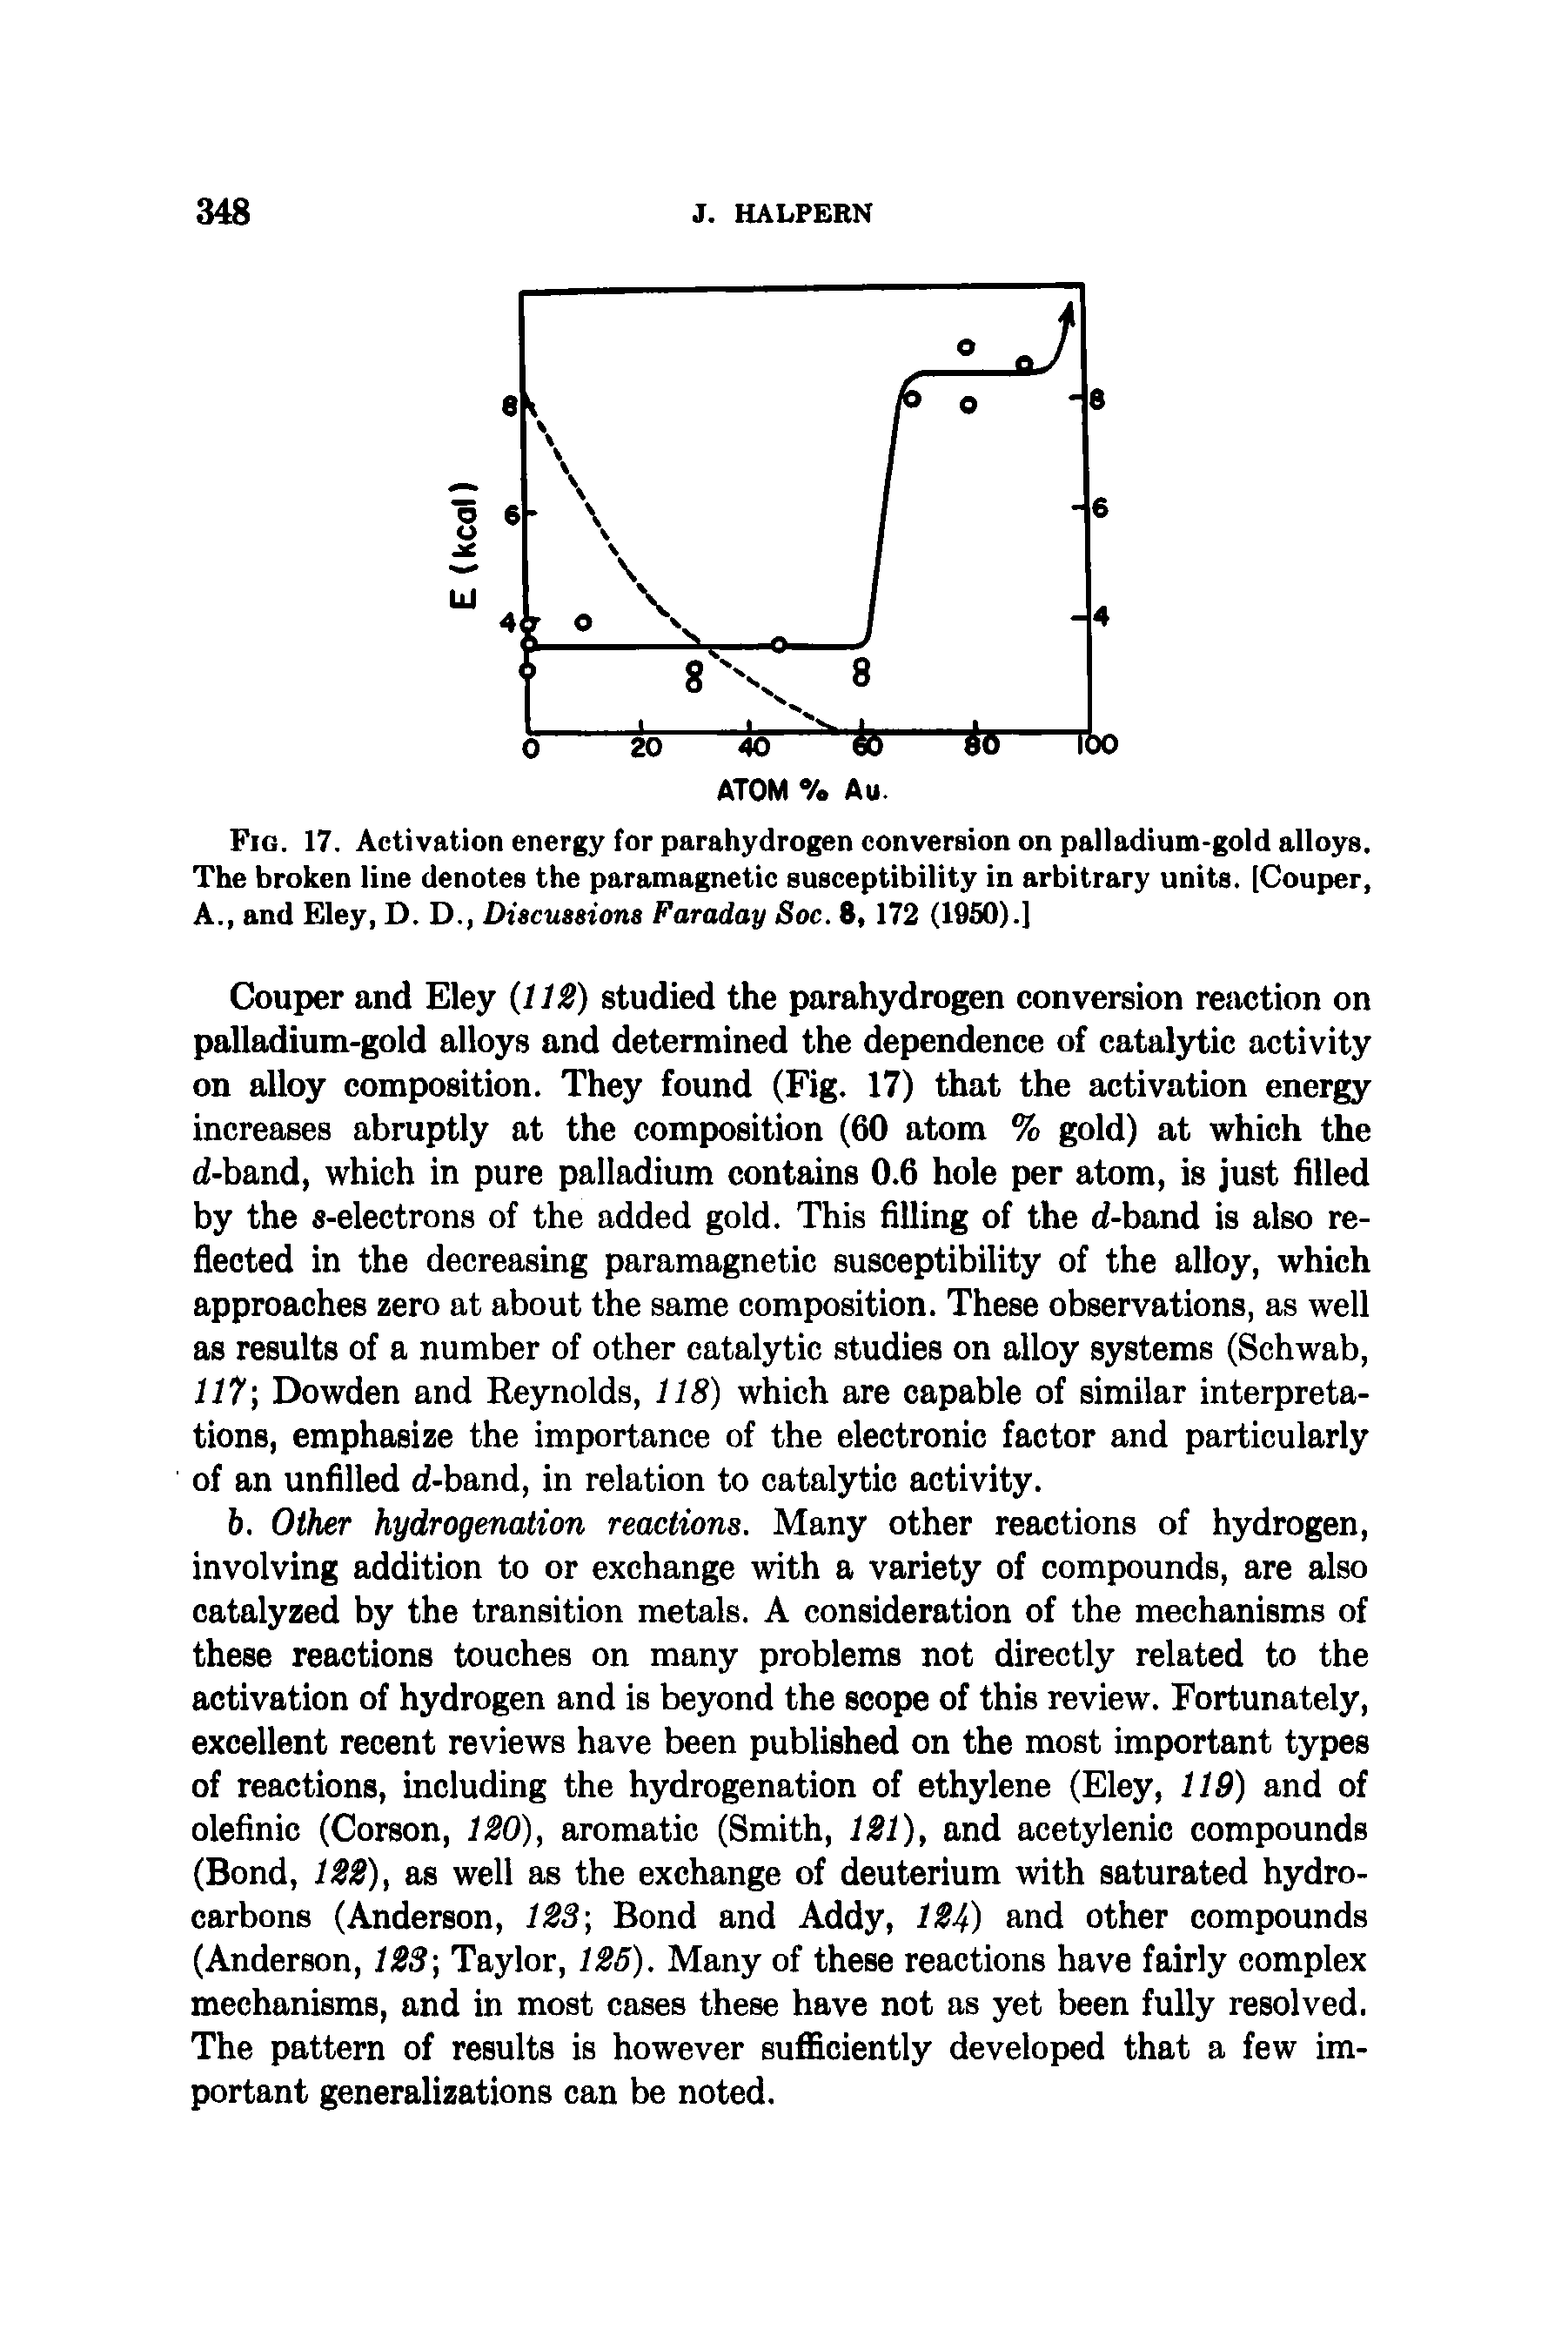 Fig. 17. Activation energy for parahydrogen conversion on palladium-gold alloys. The broken line denotes the paramagnetic susceptibility in arbitrary units. [Couper, A., and Eley, D. D., Discusaions Faraday Soc. 8, 172 (1950).]...